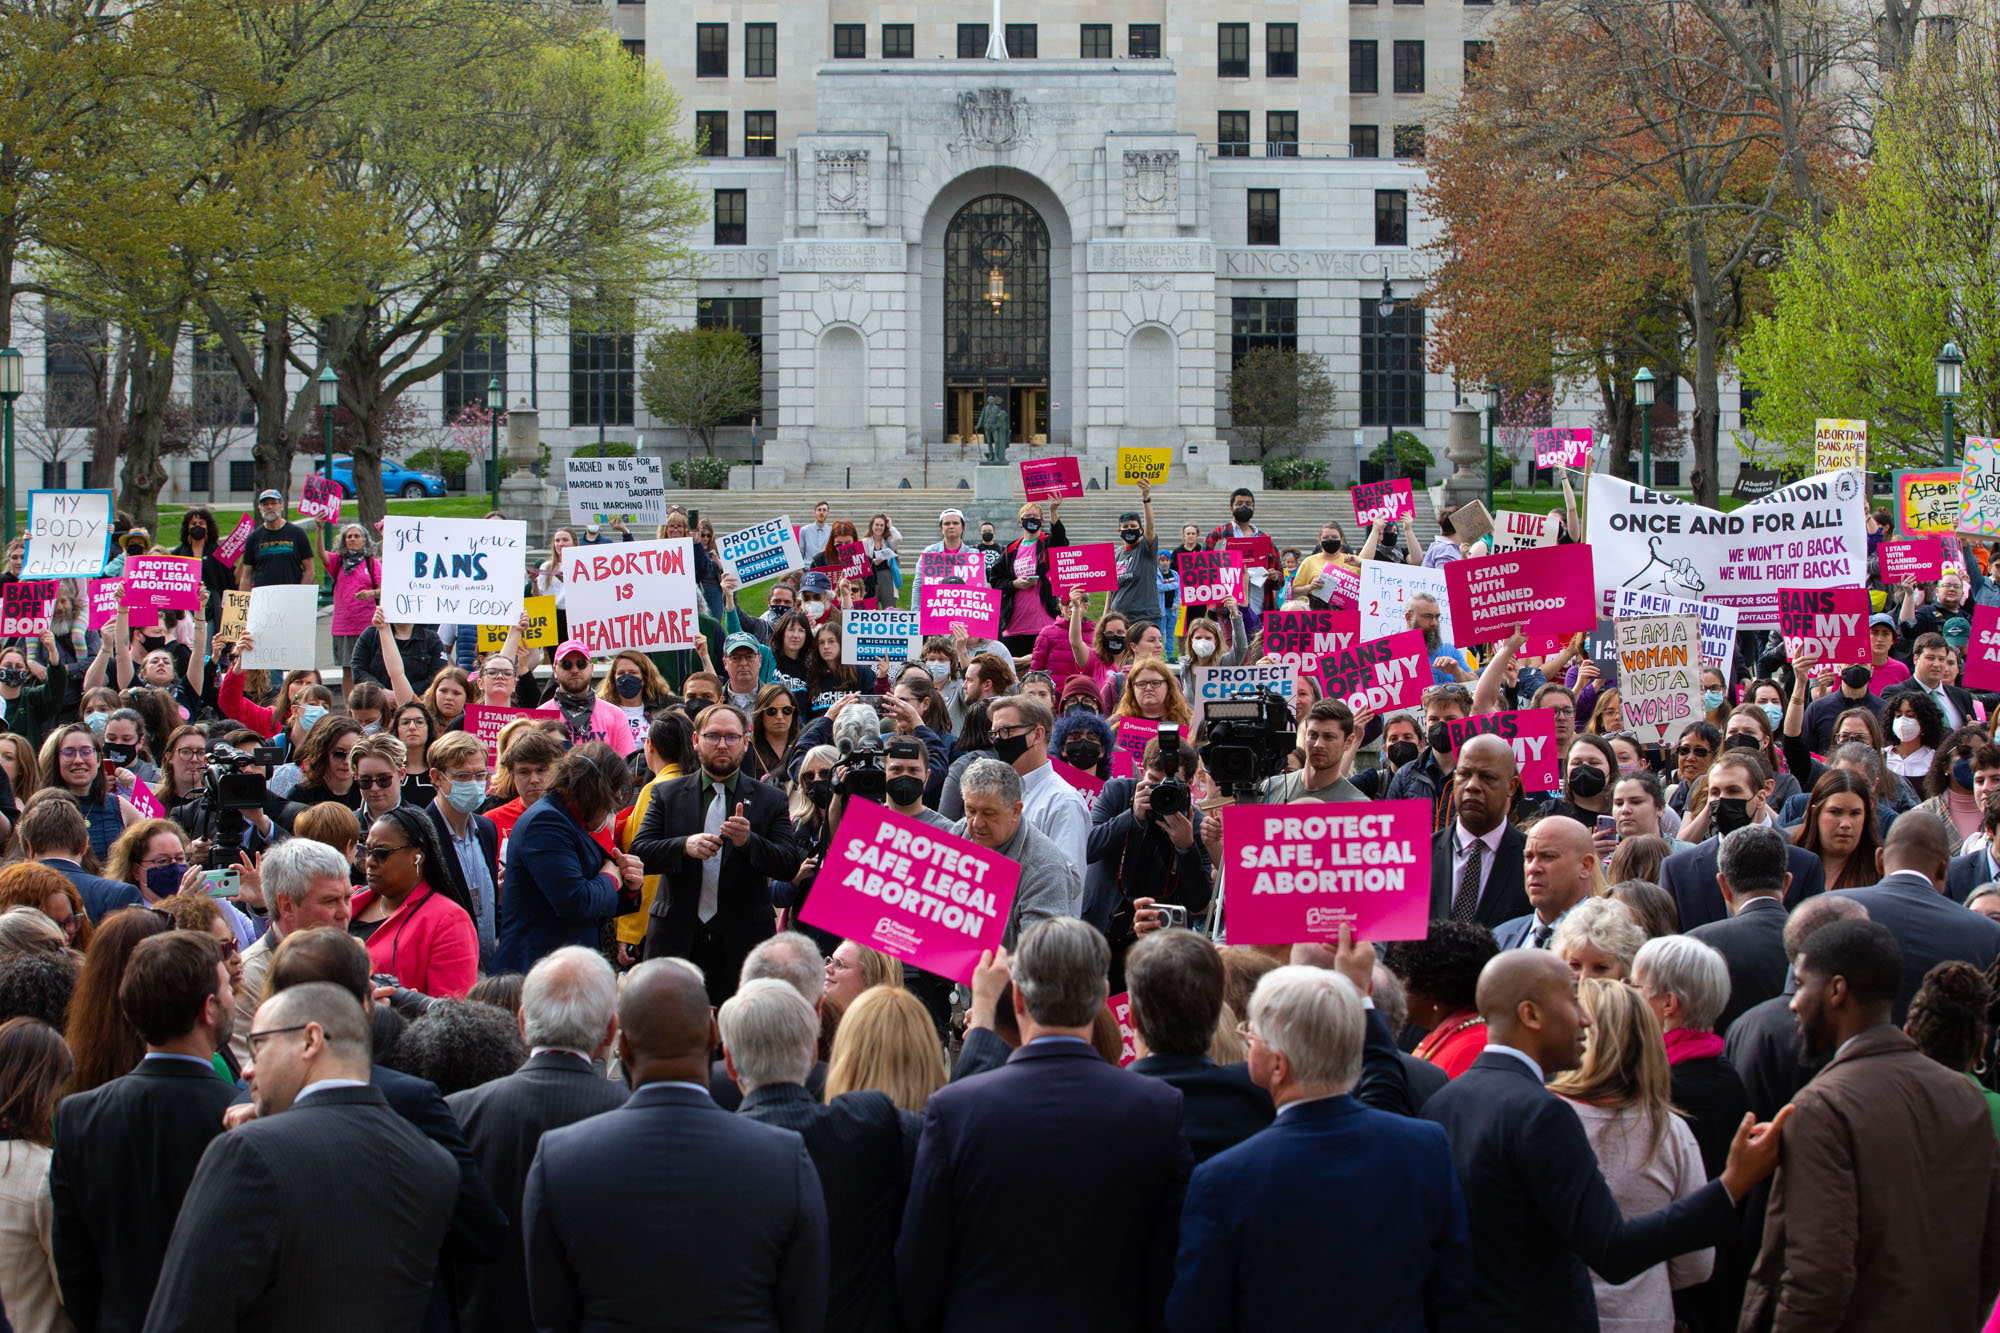 Albany rallies following Supreme Court abortion news